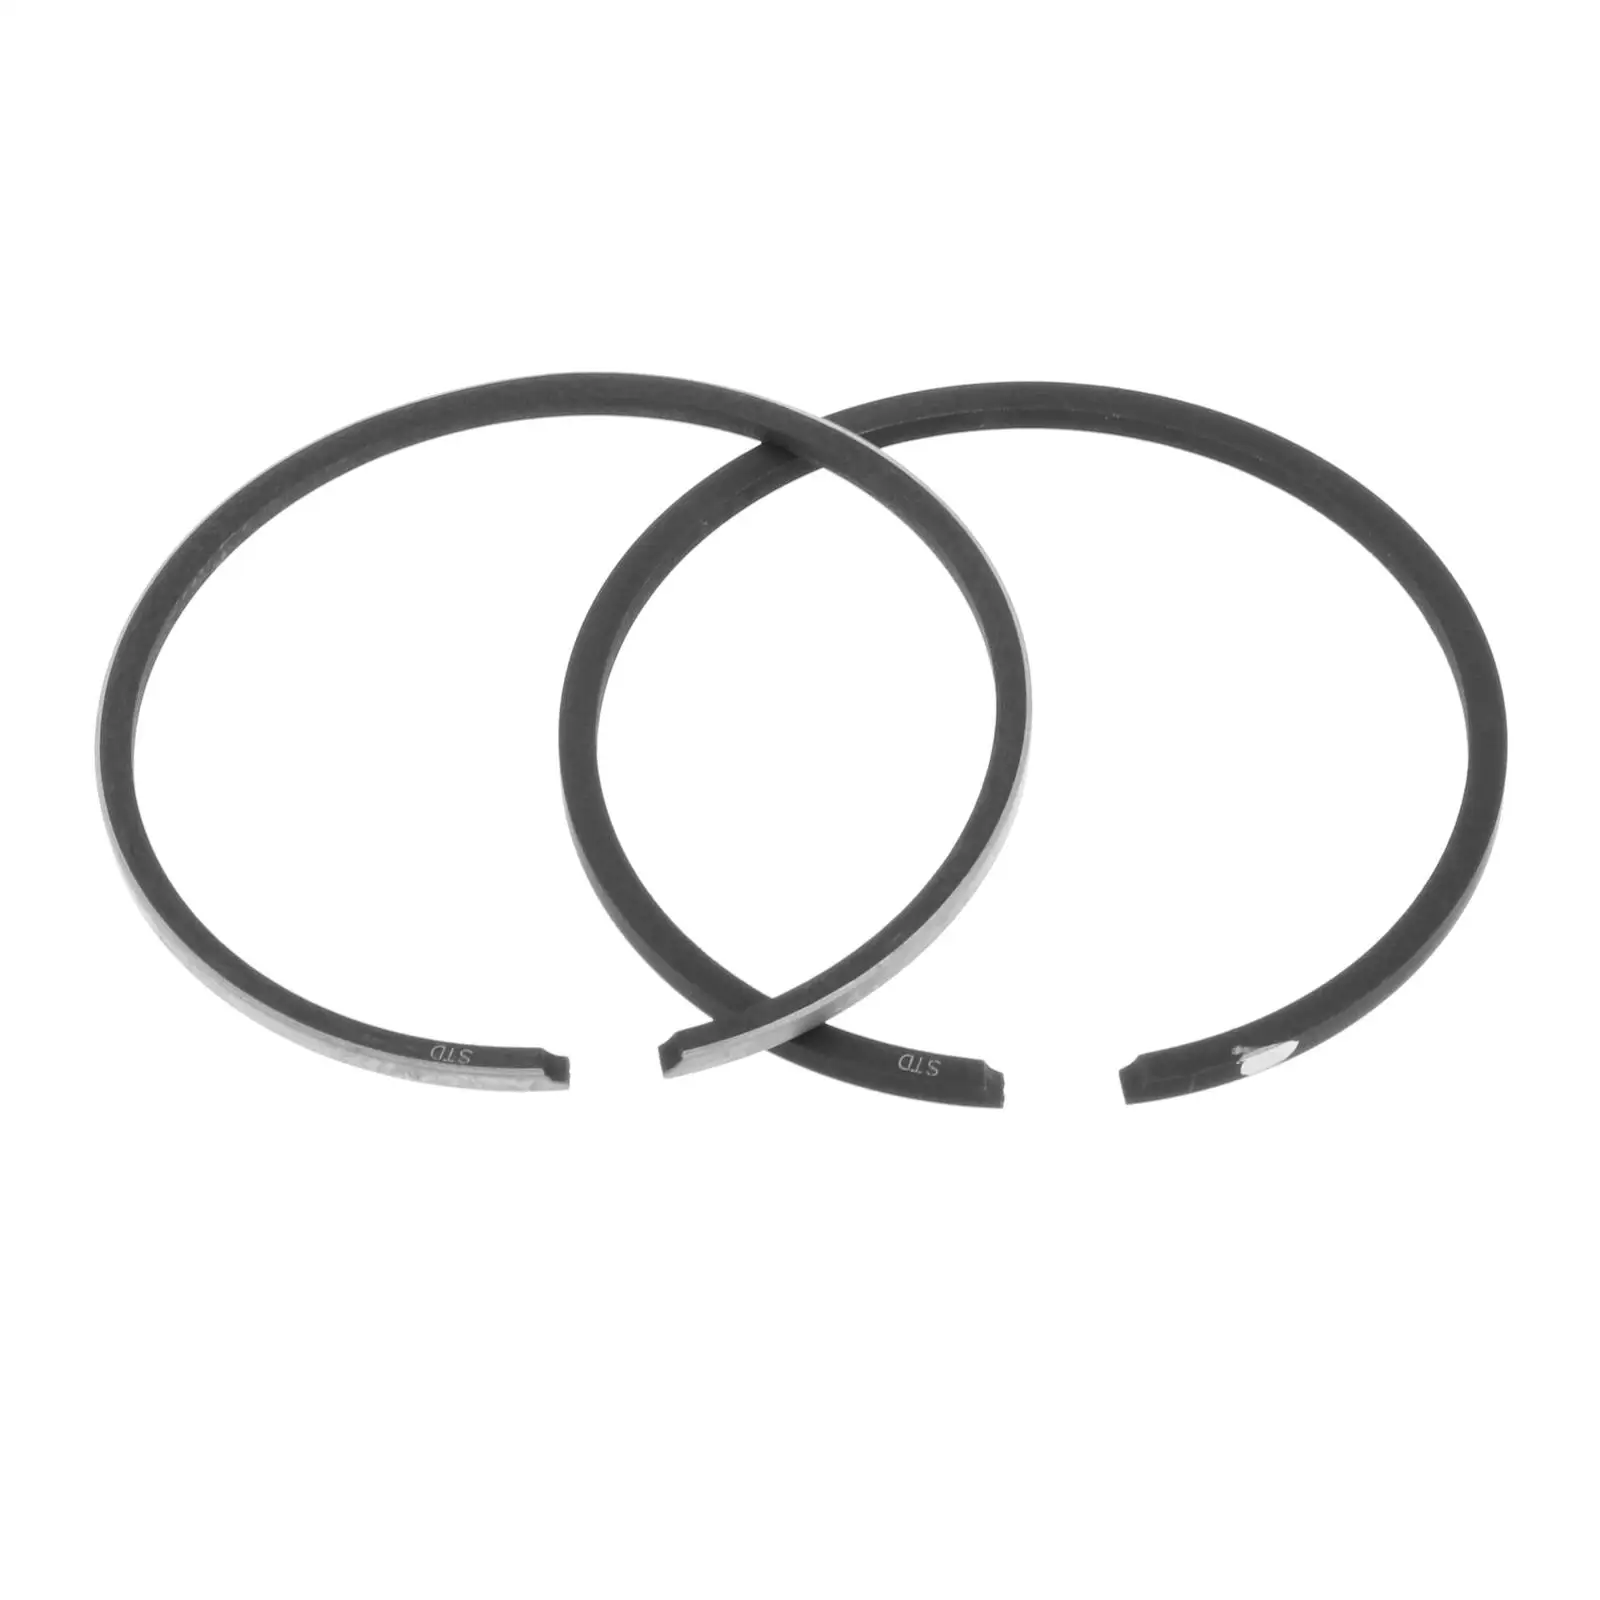 2 Pieces Engine Piston Rings No. 682-11610-01-00 for Parsun 9.9HP 15HP Marine Boat Outboards Engines